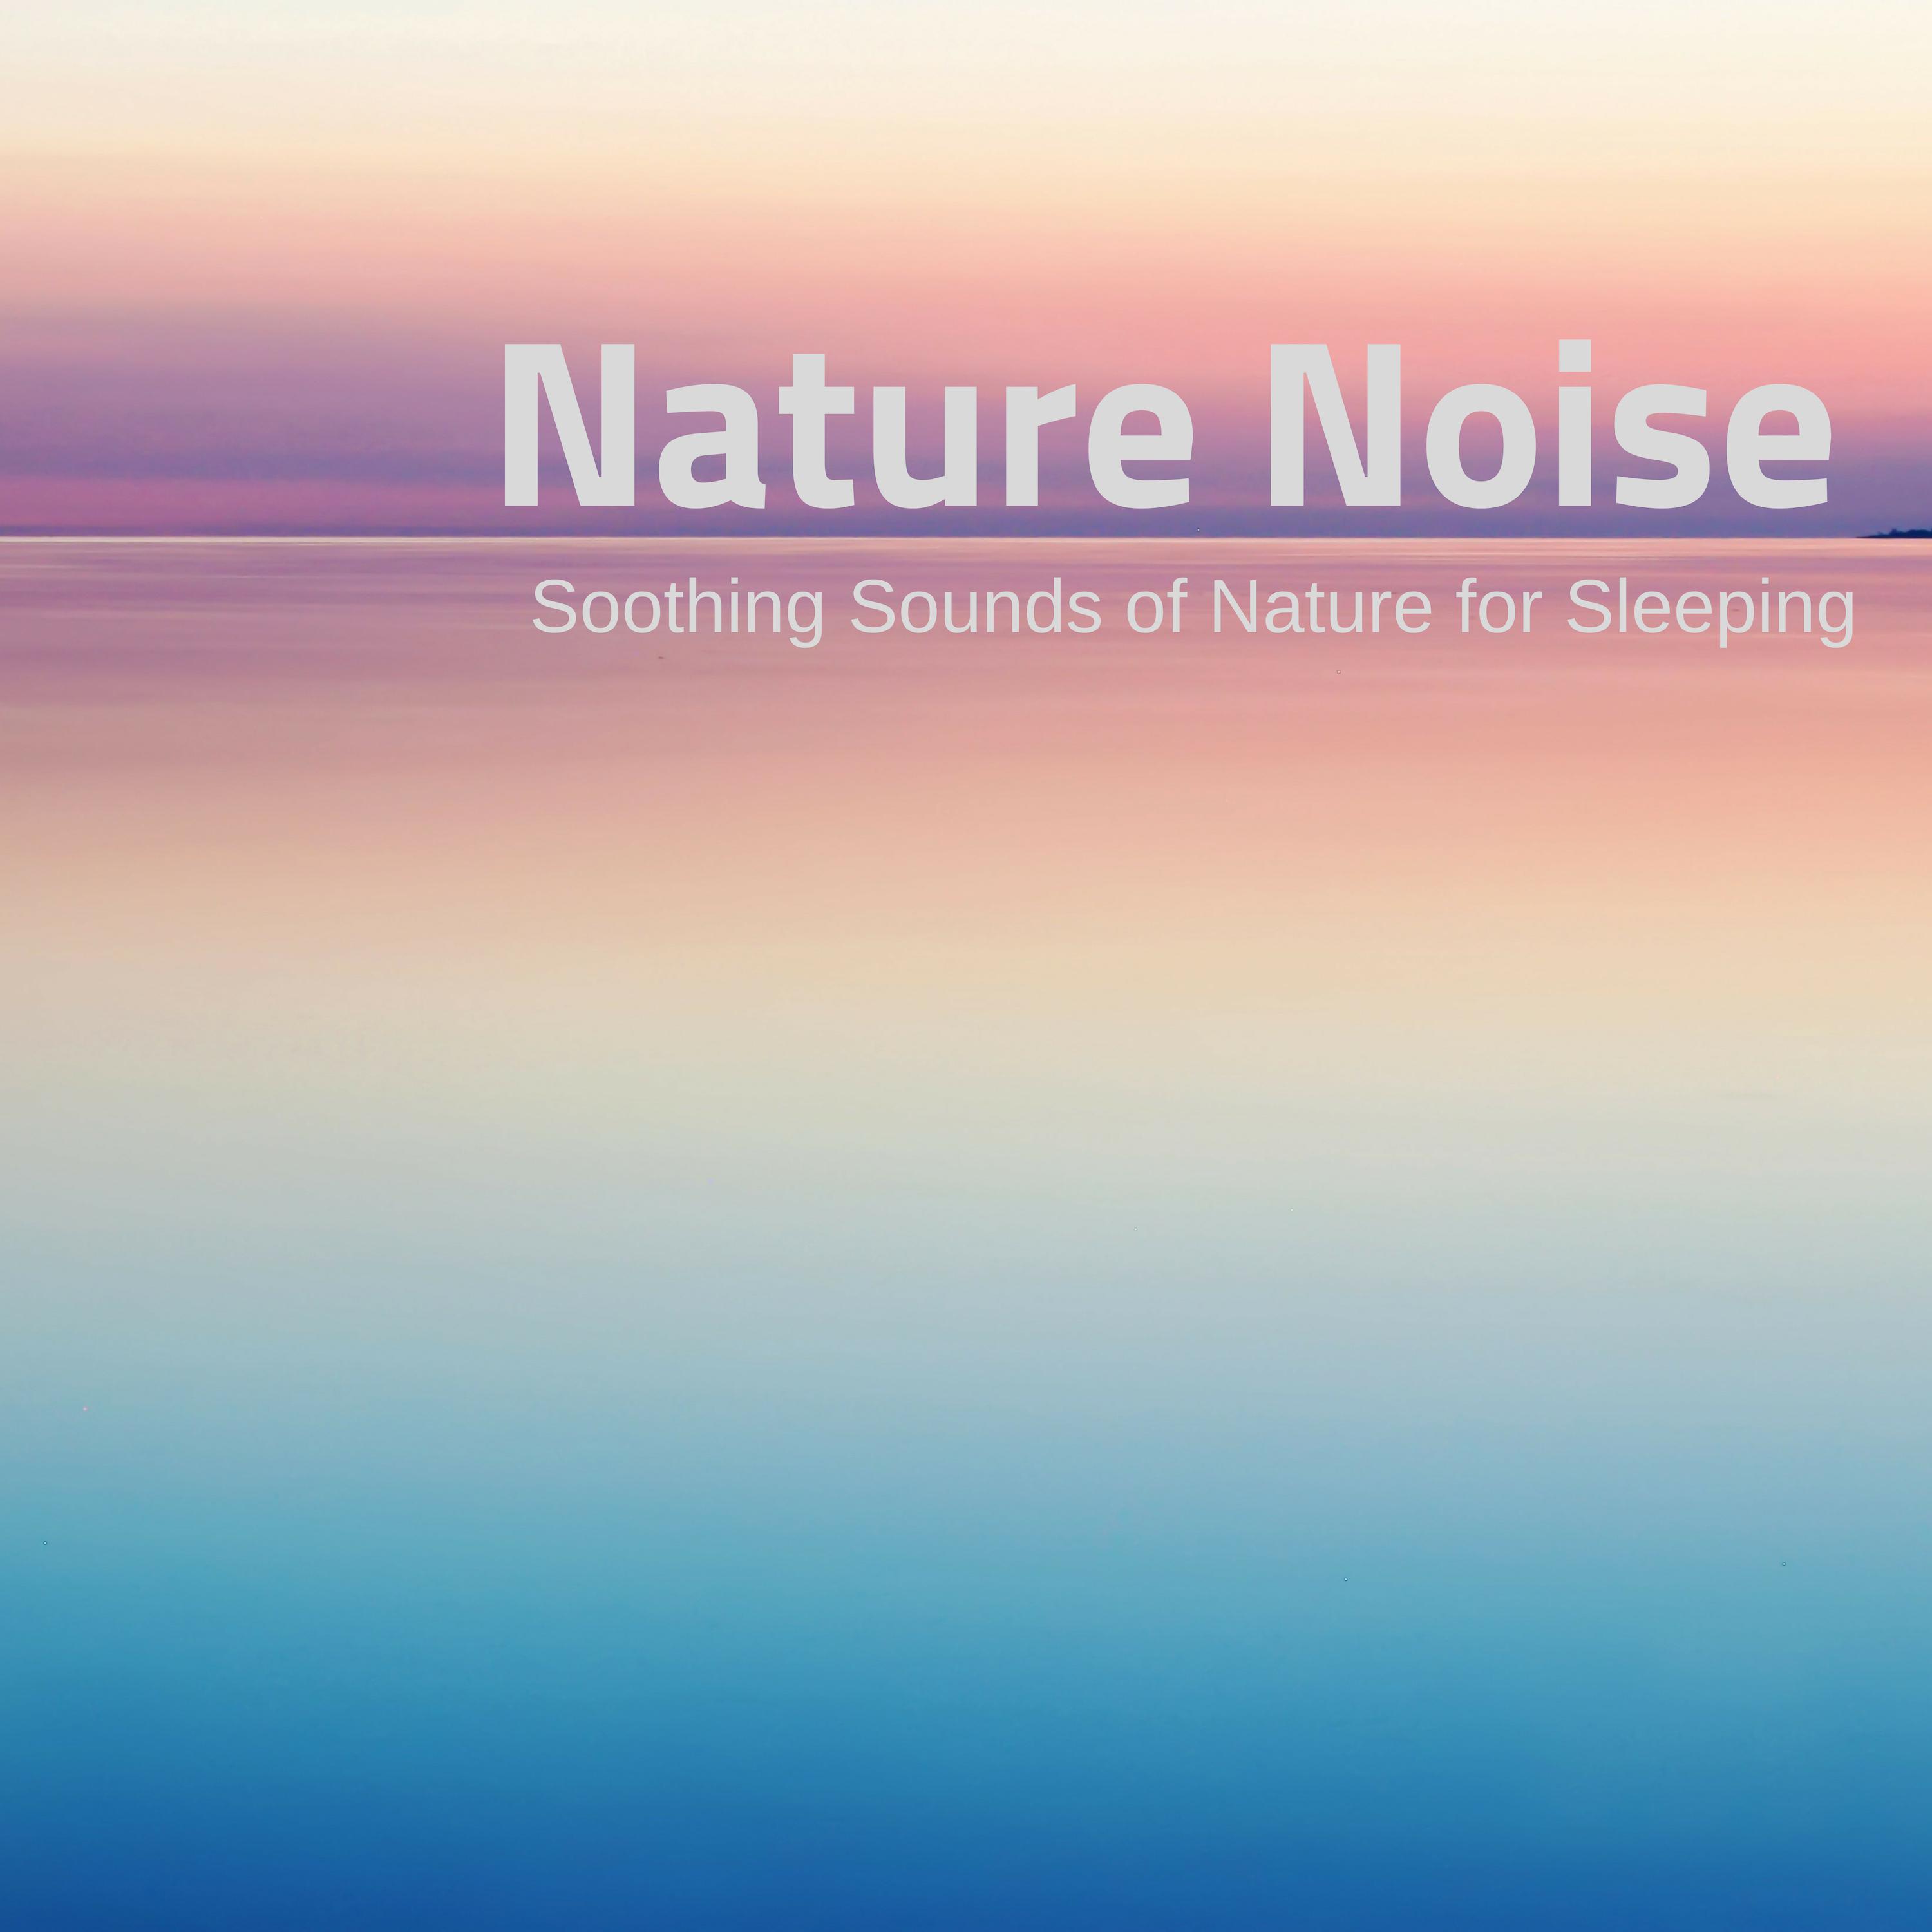 Nature Noise - Soothing Sounds of Nature for Sleeping